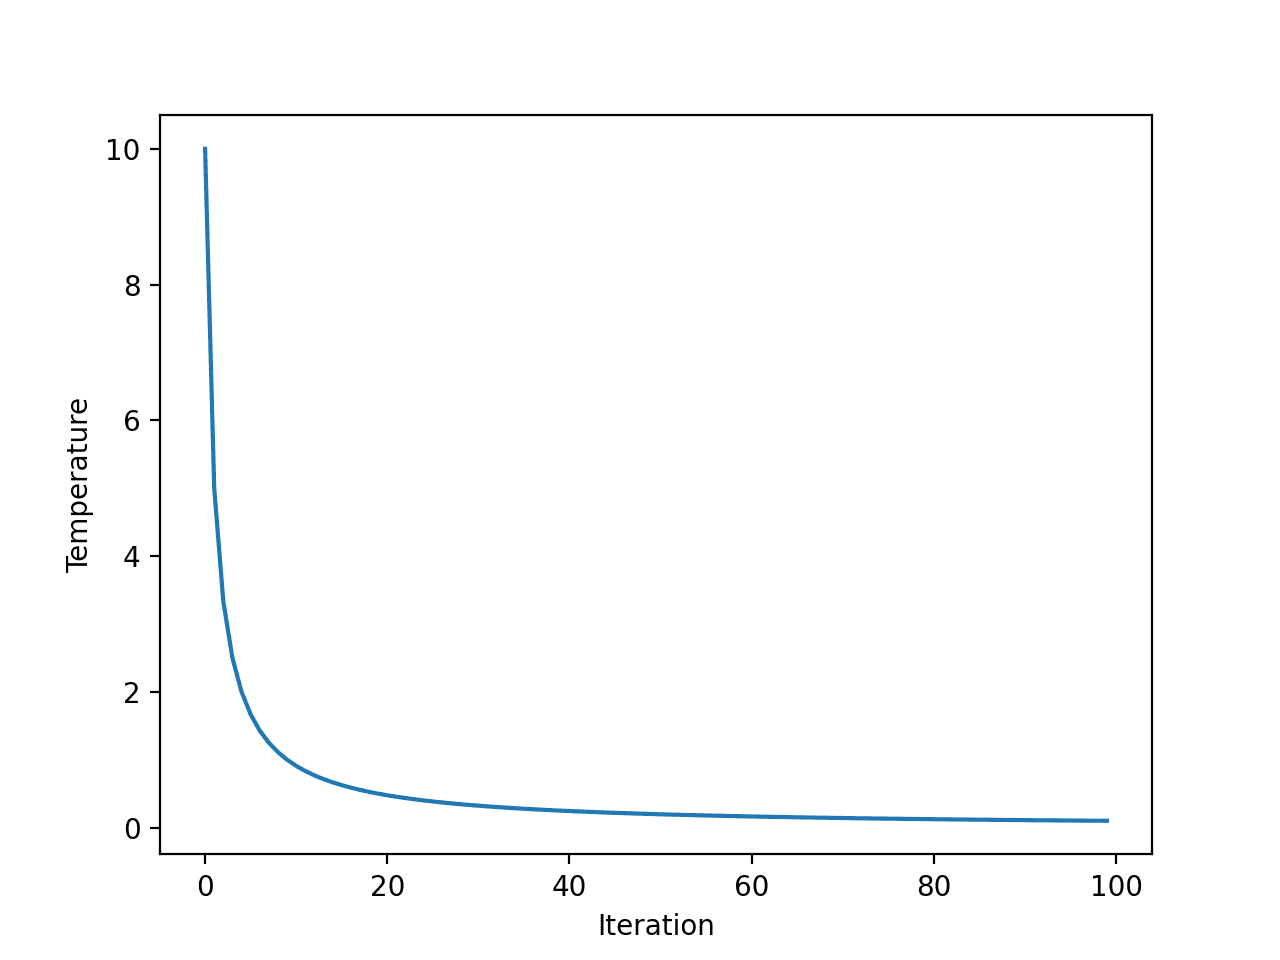 Line Plot of Temperature vs. Algorithm Iteration for Fast Annealing